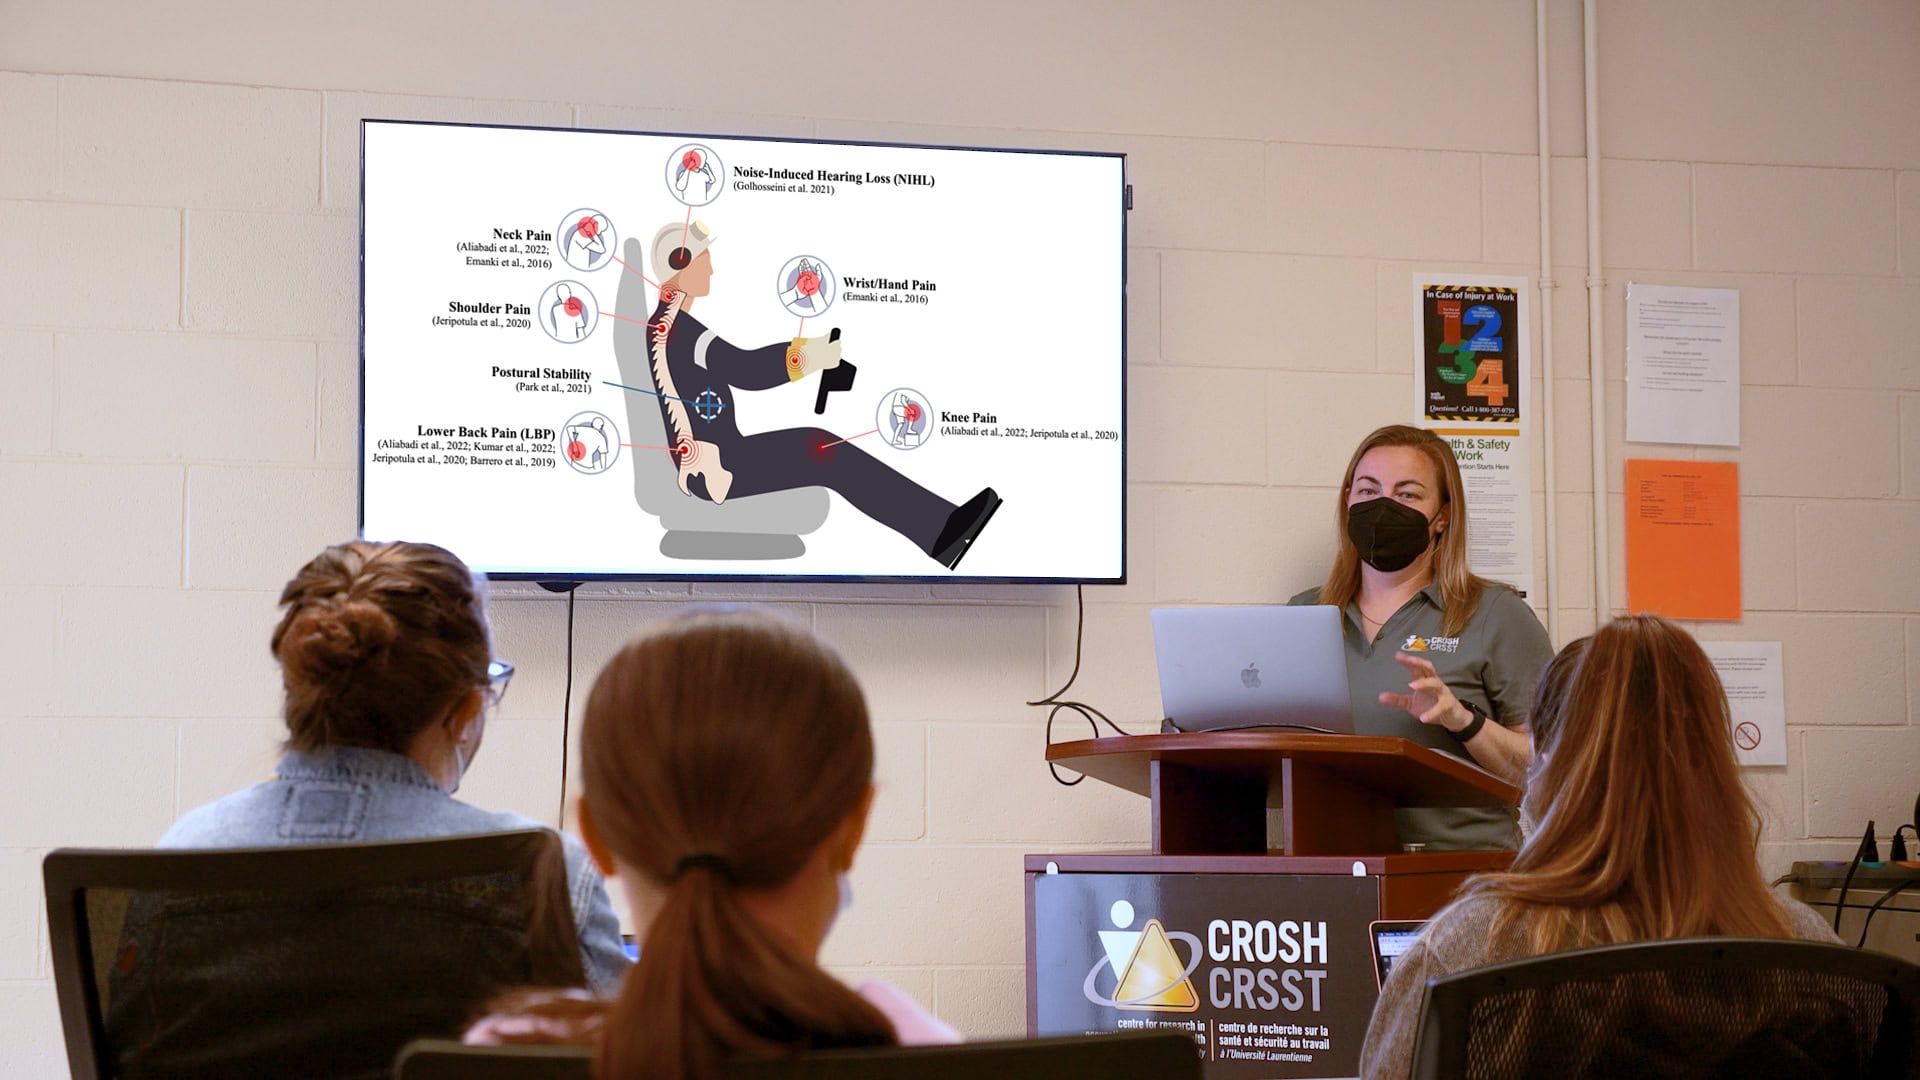 Researcher instructing seated students next to a projected image of the health impacts of vibration exposure.